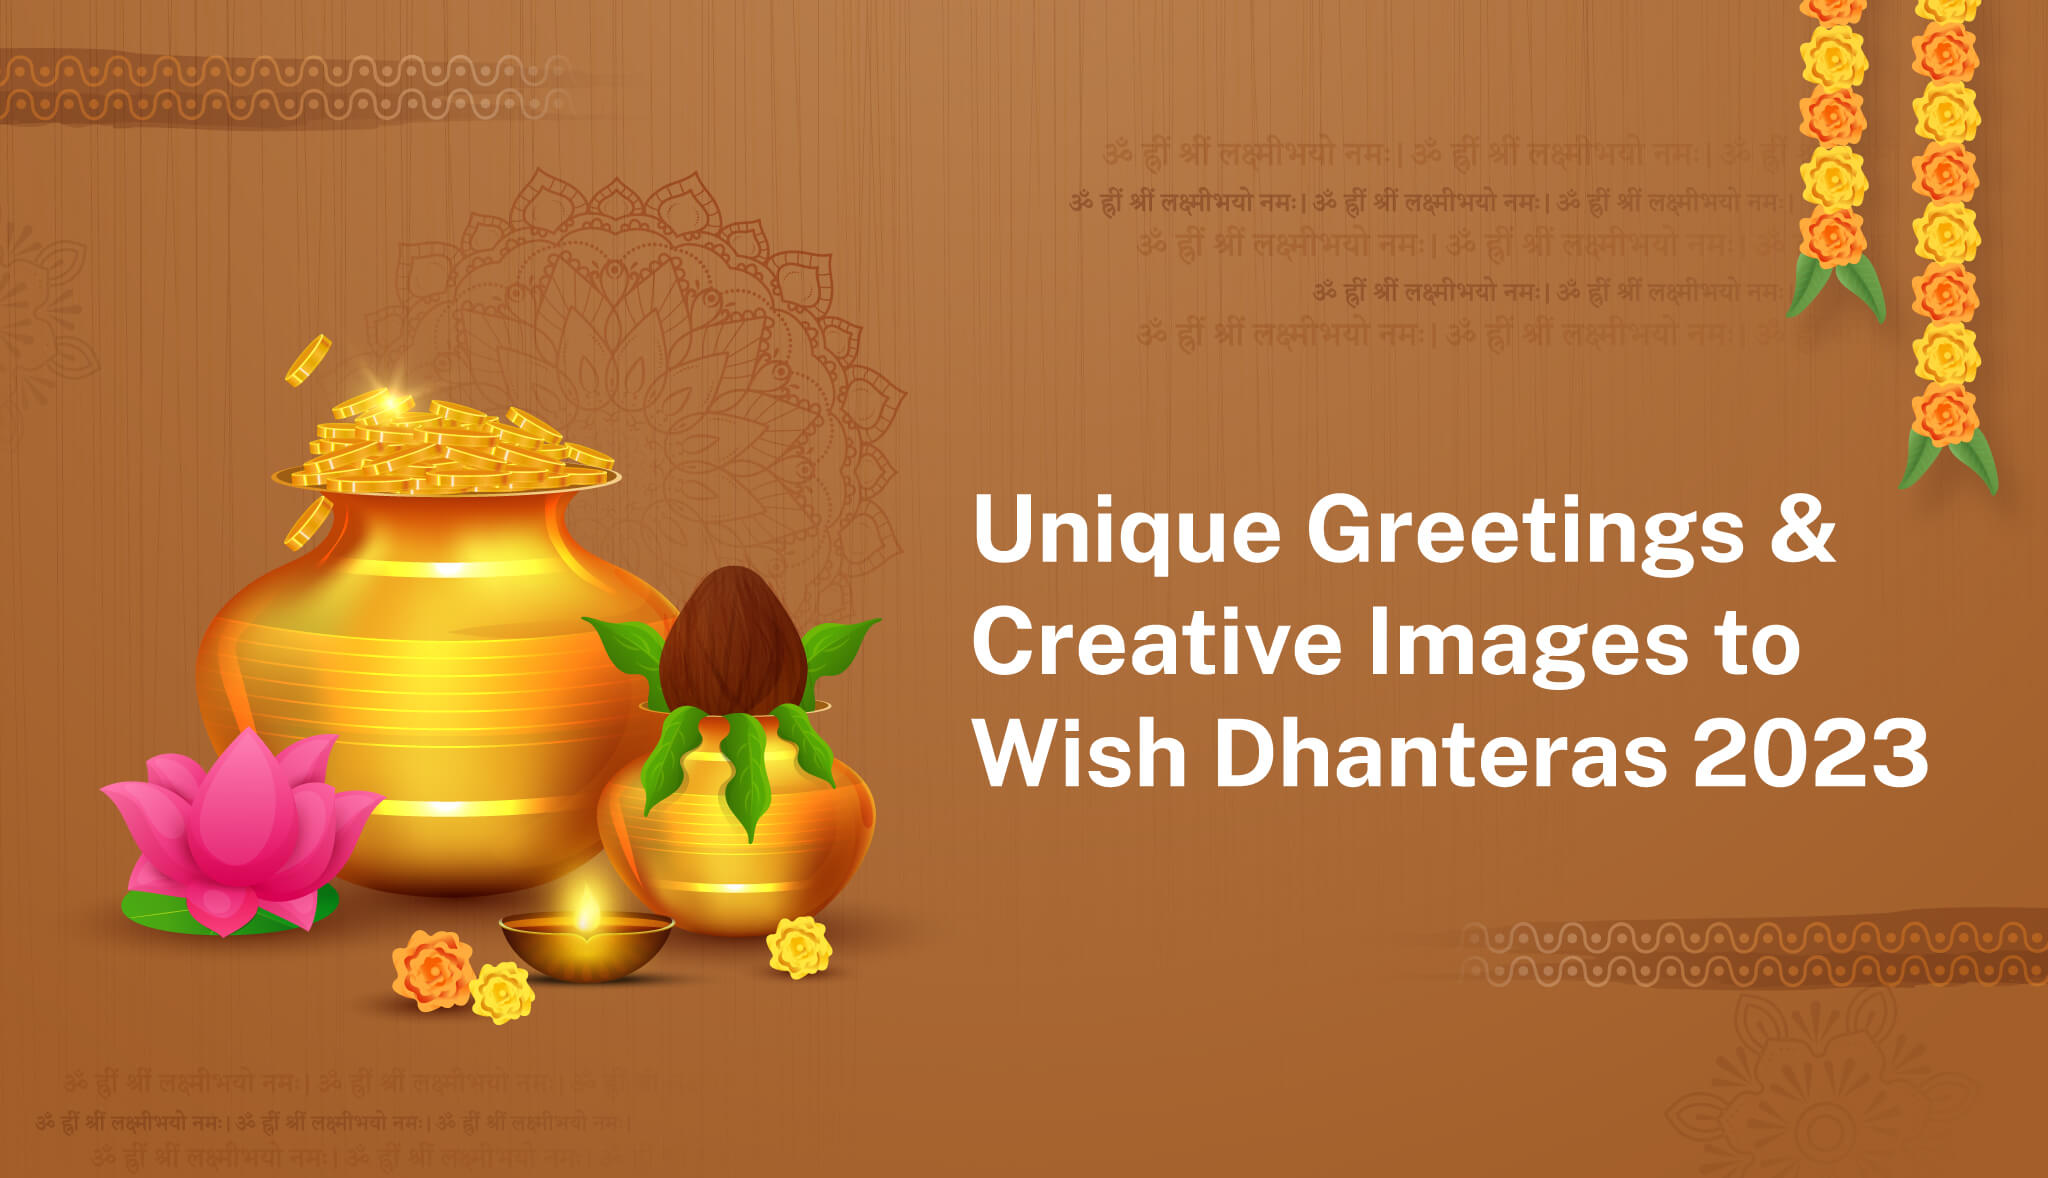 Unique greetings and creative images to wish Dhanteras 2023 - Post it